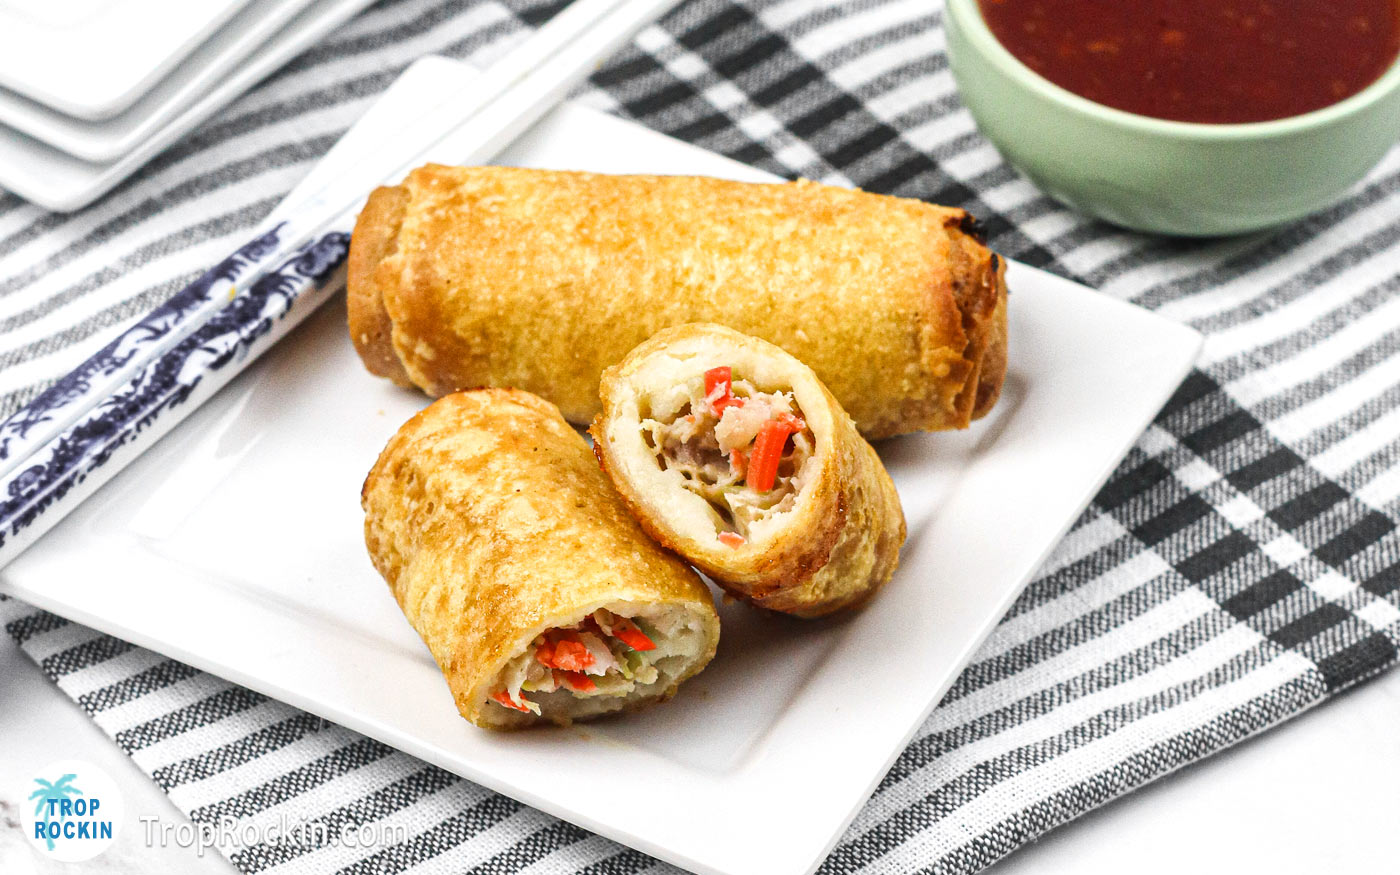 Two cooked air fryer frozen egg rolls on square white plate. One egg roll is cut in half.